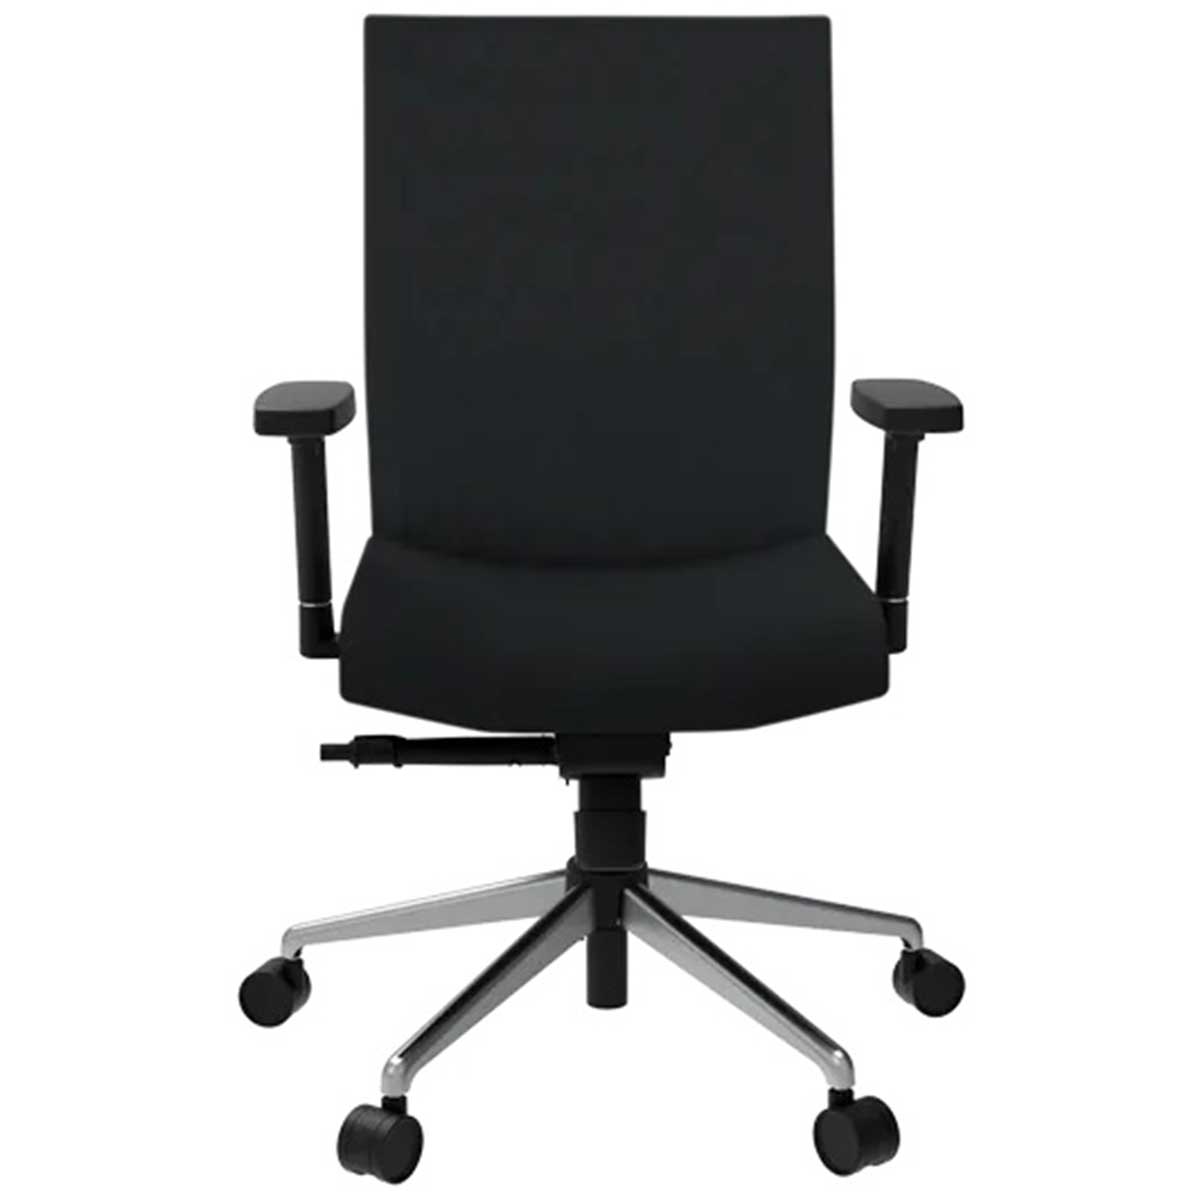 Staff Chair Manufacturers, Suppliers in Rohini Sector 7